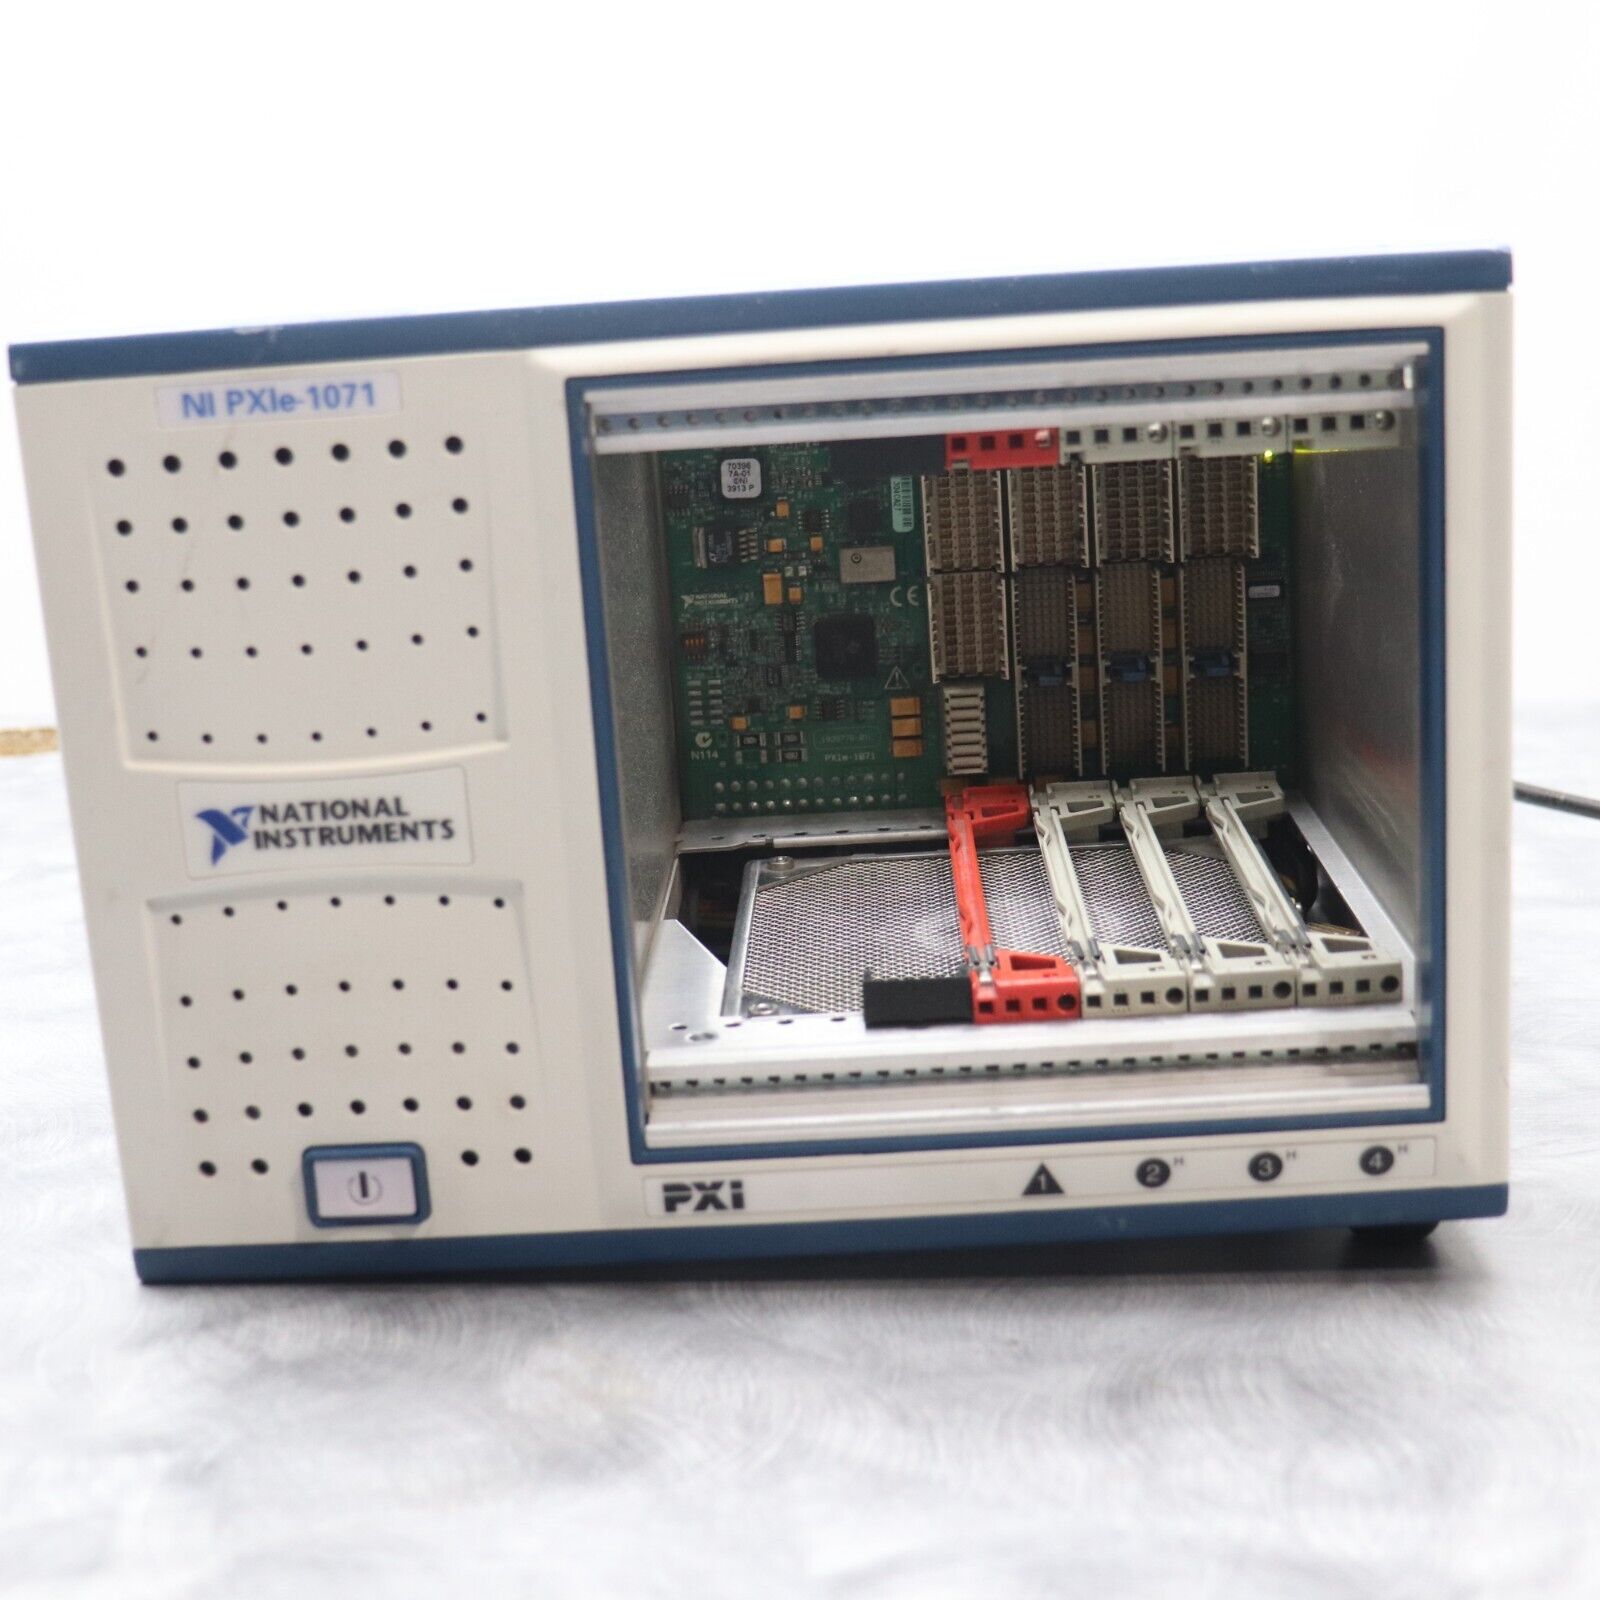 National Instruments, NI PXIE-1071 Chassis